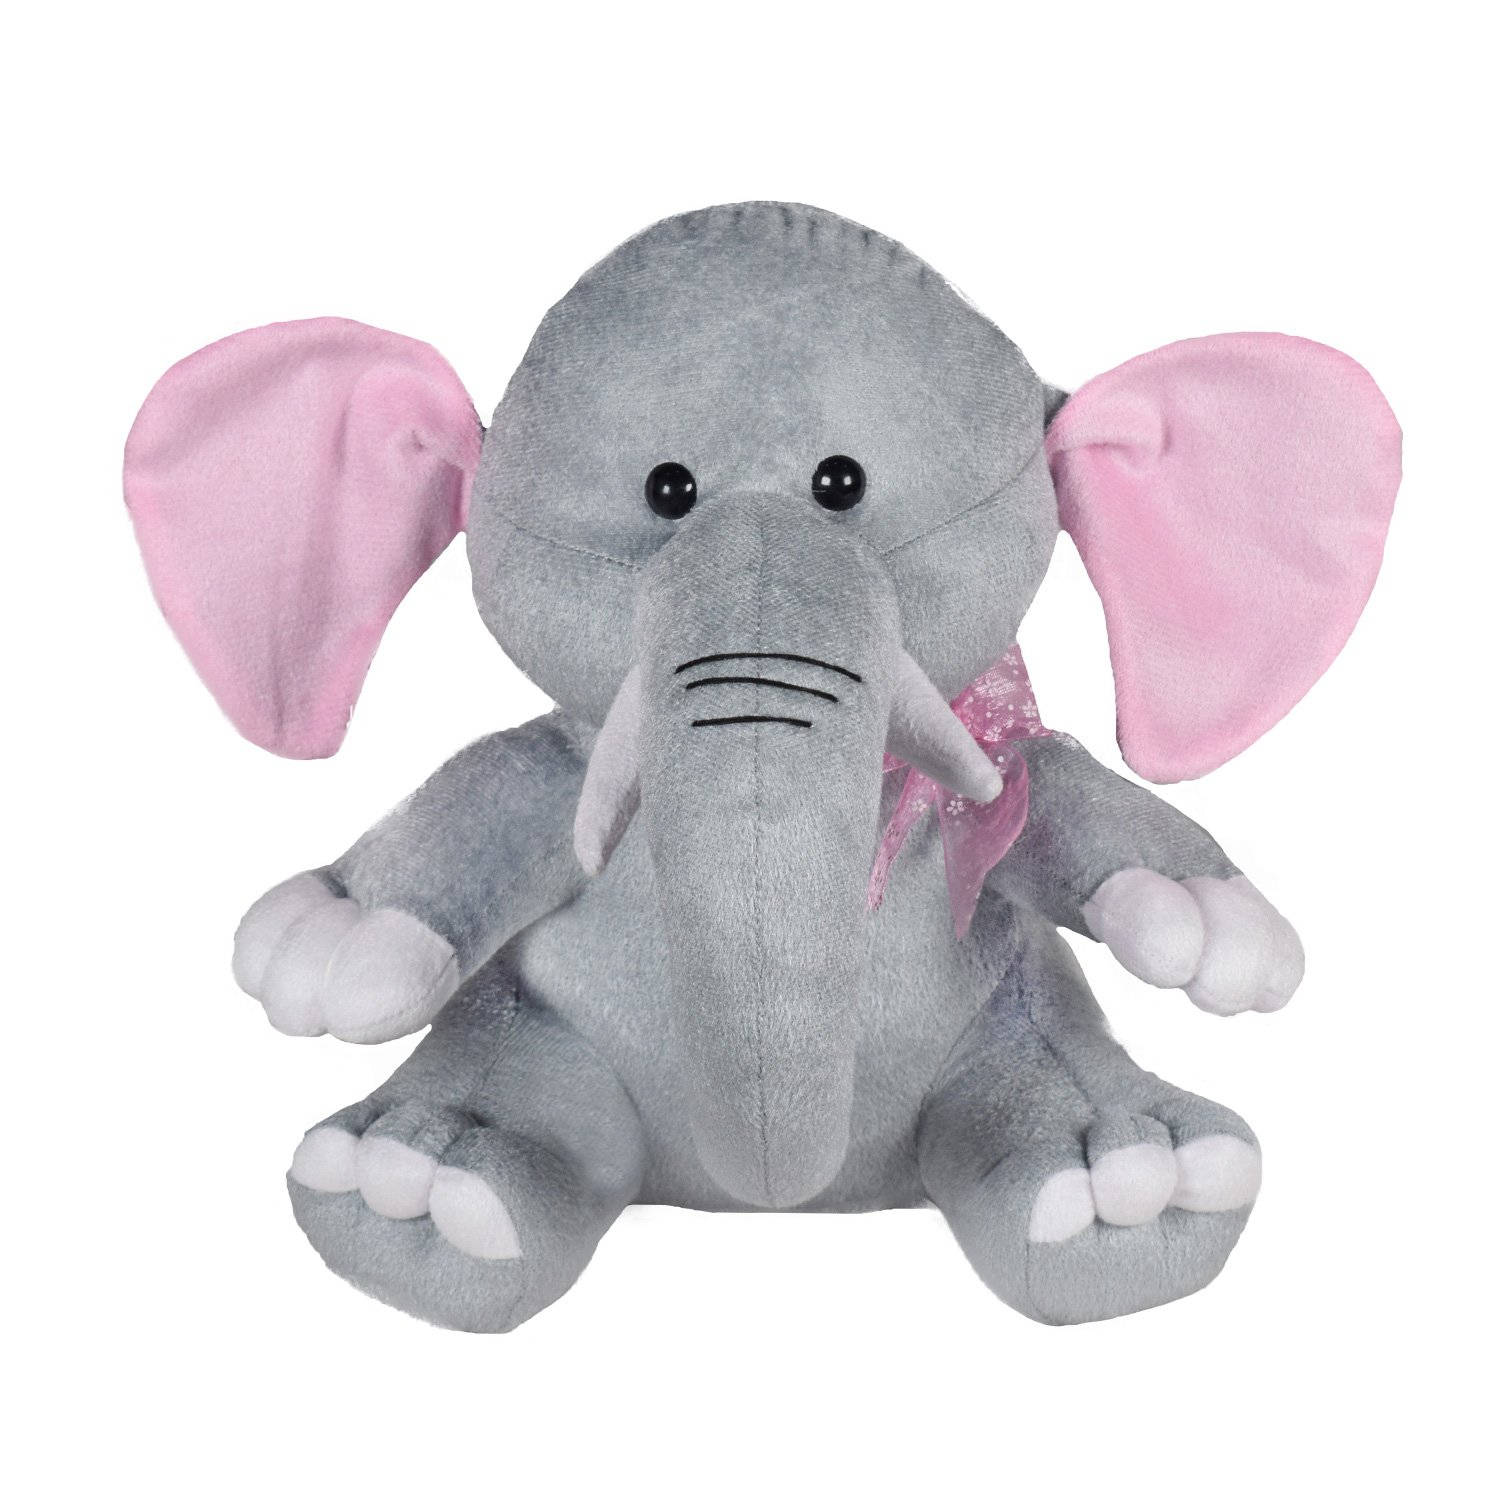 Caption: Cute and Cuddly Giant Elephant Beanie Boos Toy Wallpaper